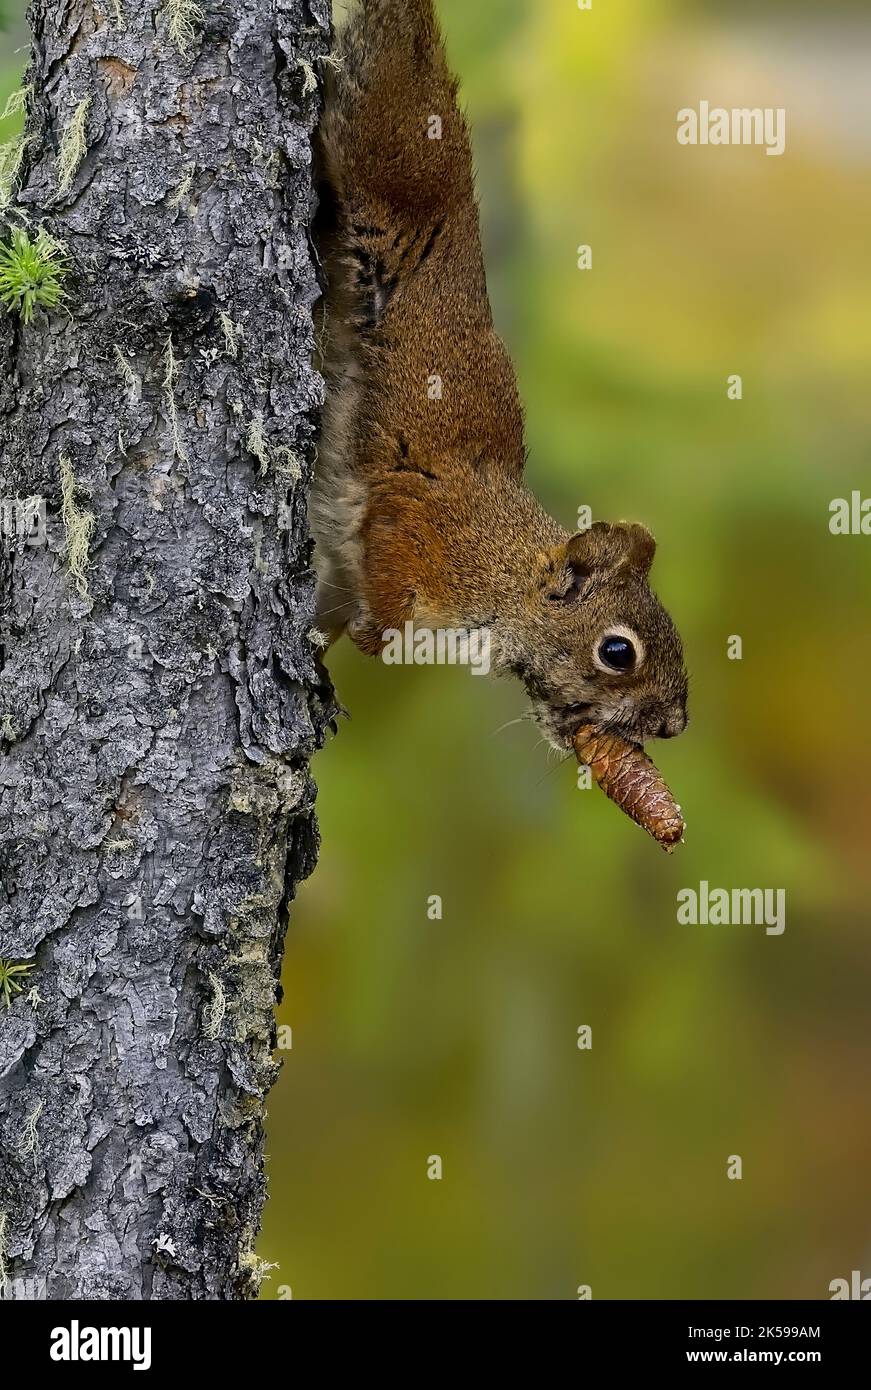 A red squirrel 'Tamiasciurus hudsonicus', climbing down a spruce tree while holding a spruce cone in his mouth Stock Photo